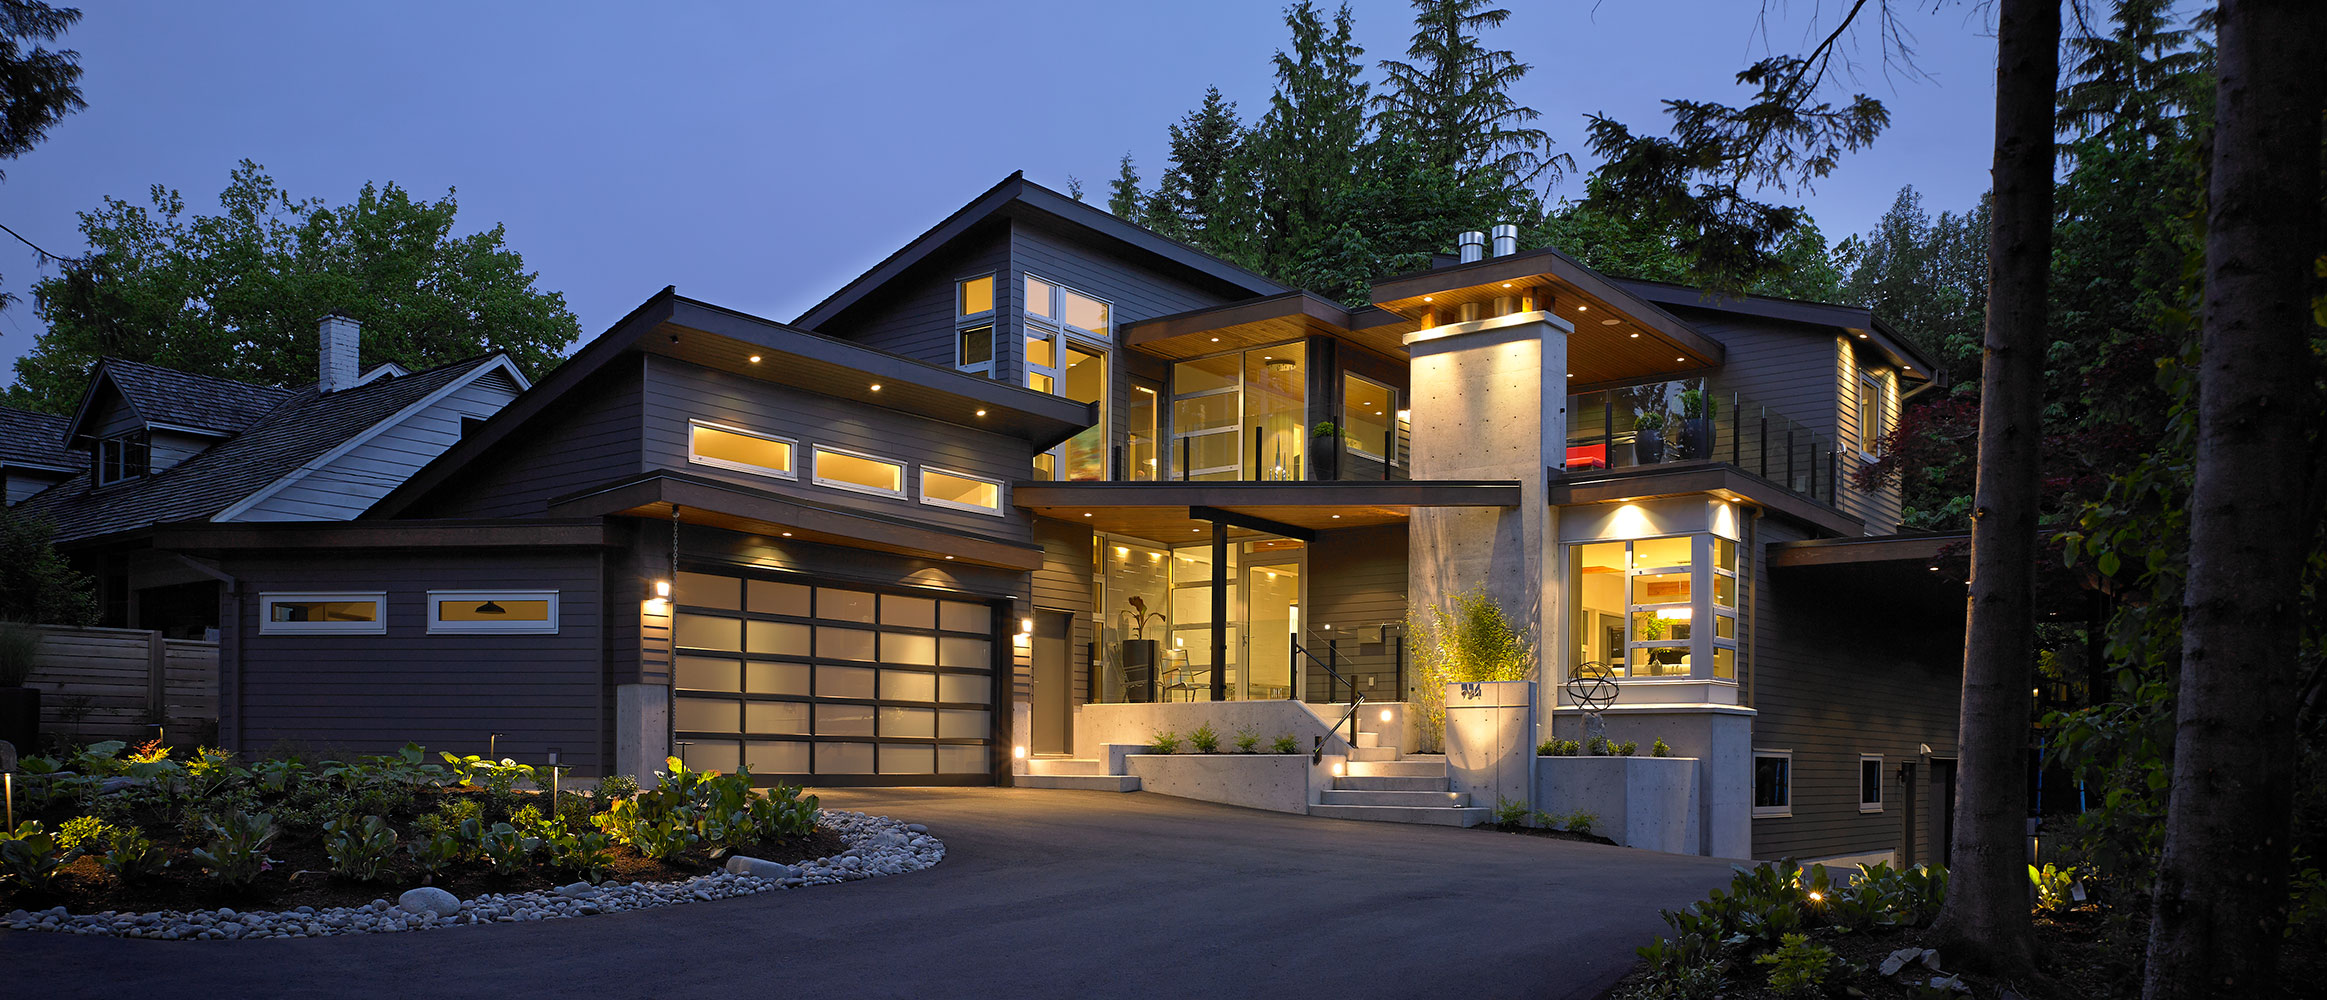 renovator vancouver, vancouver renovator, renovator of the year